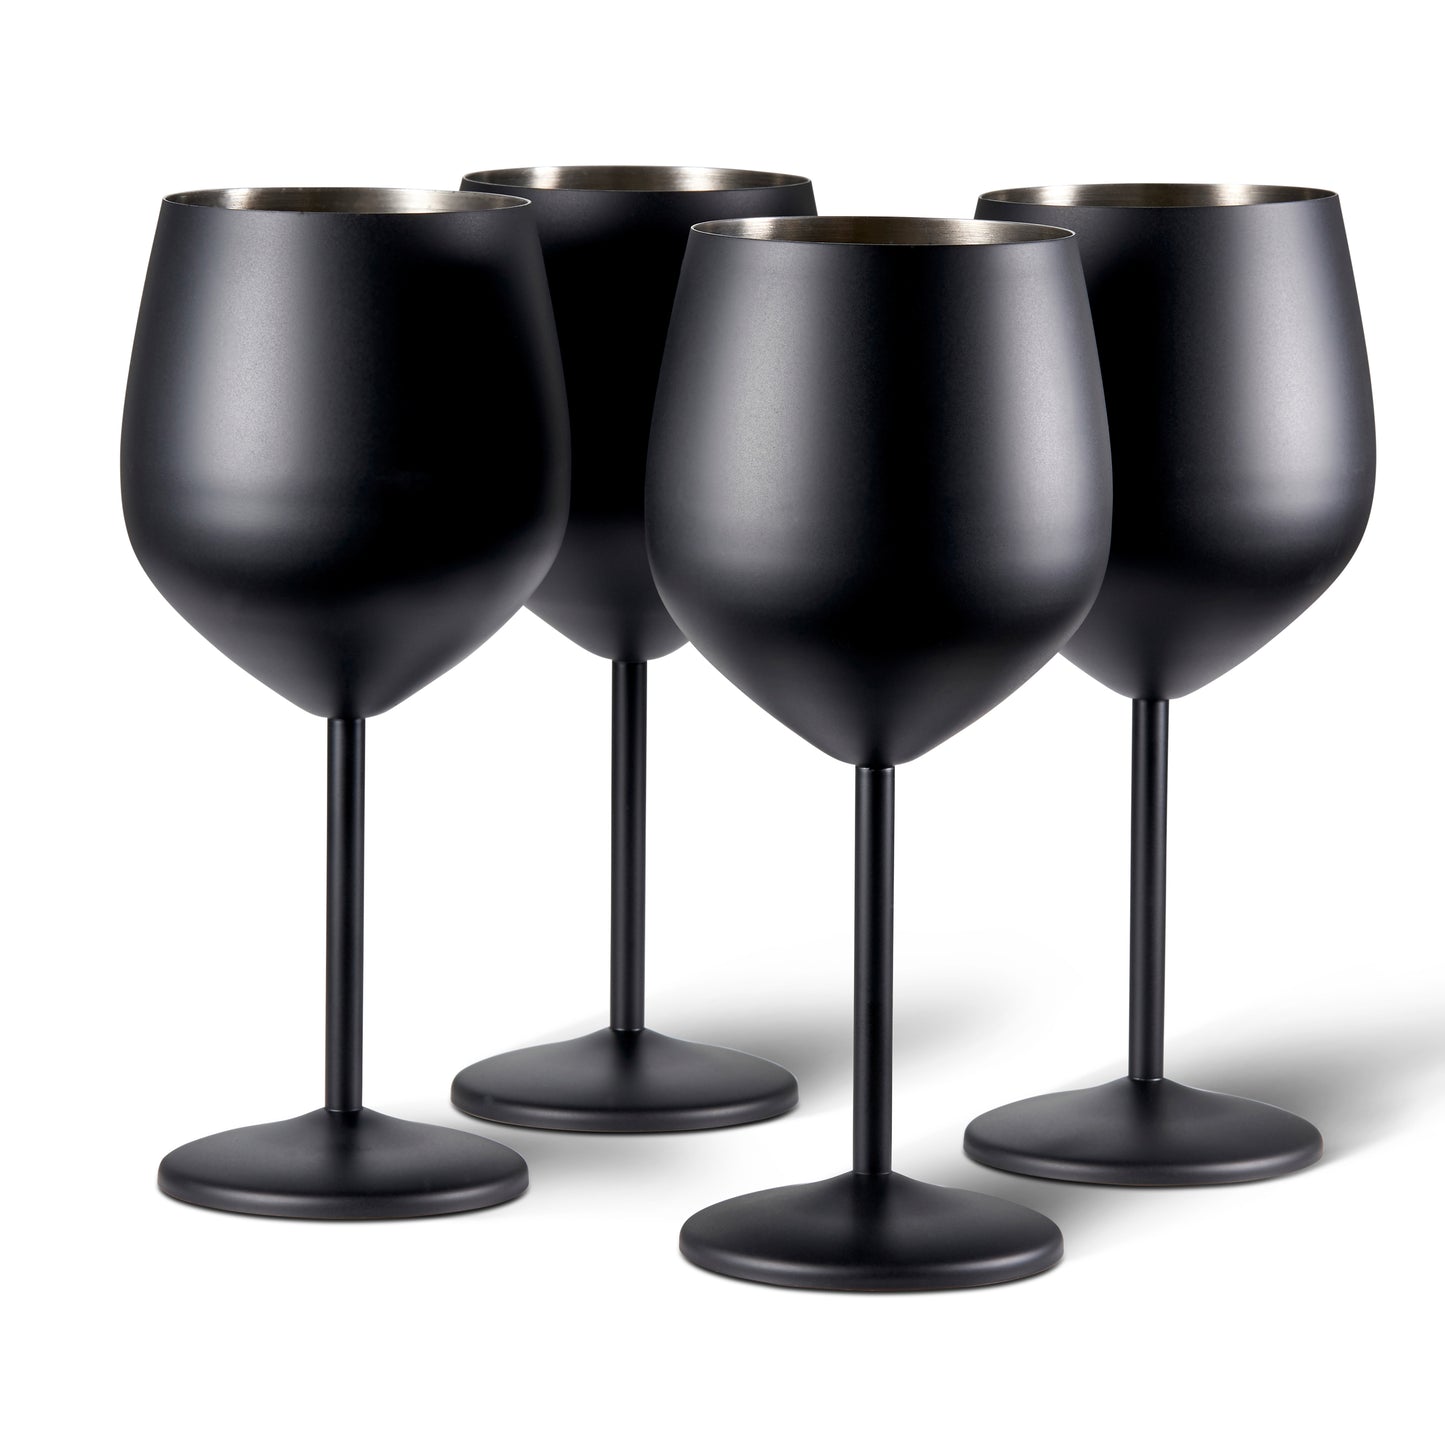 Hotel Collection Set of 4 Black-Cased Stem Wine Glasses, Created